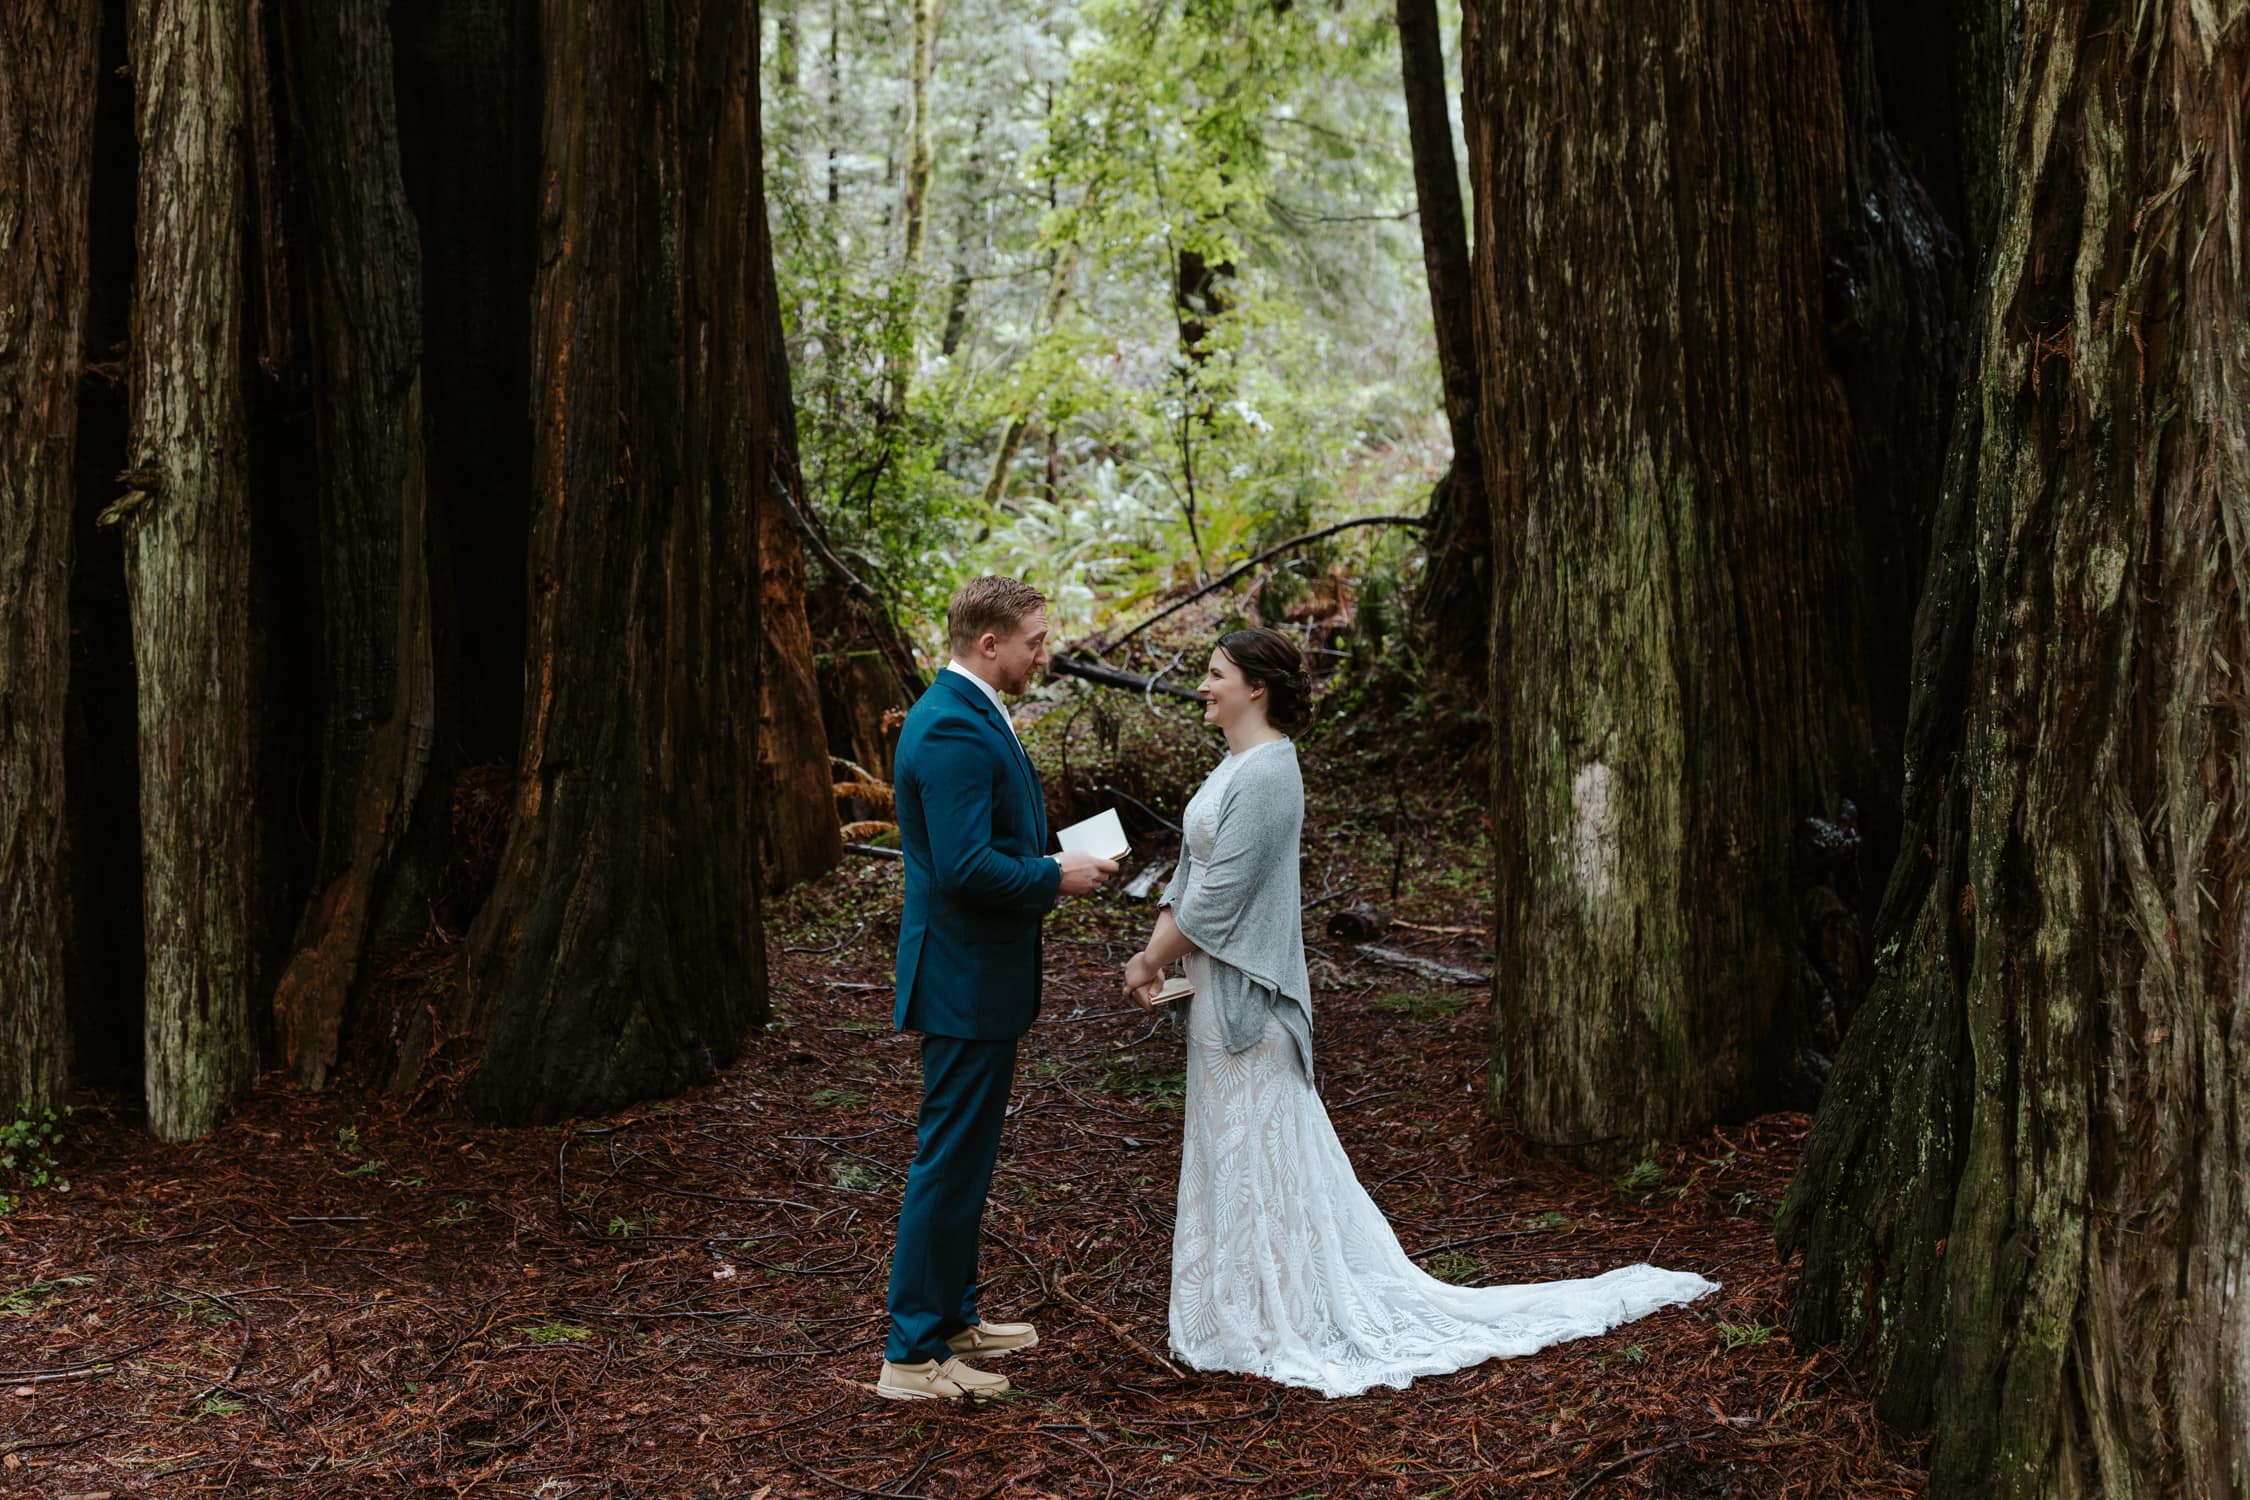 A bride and groom exchanging vows in Templeman Grove in Redwood National Park.